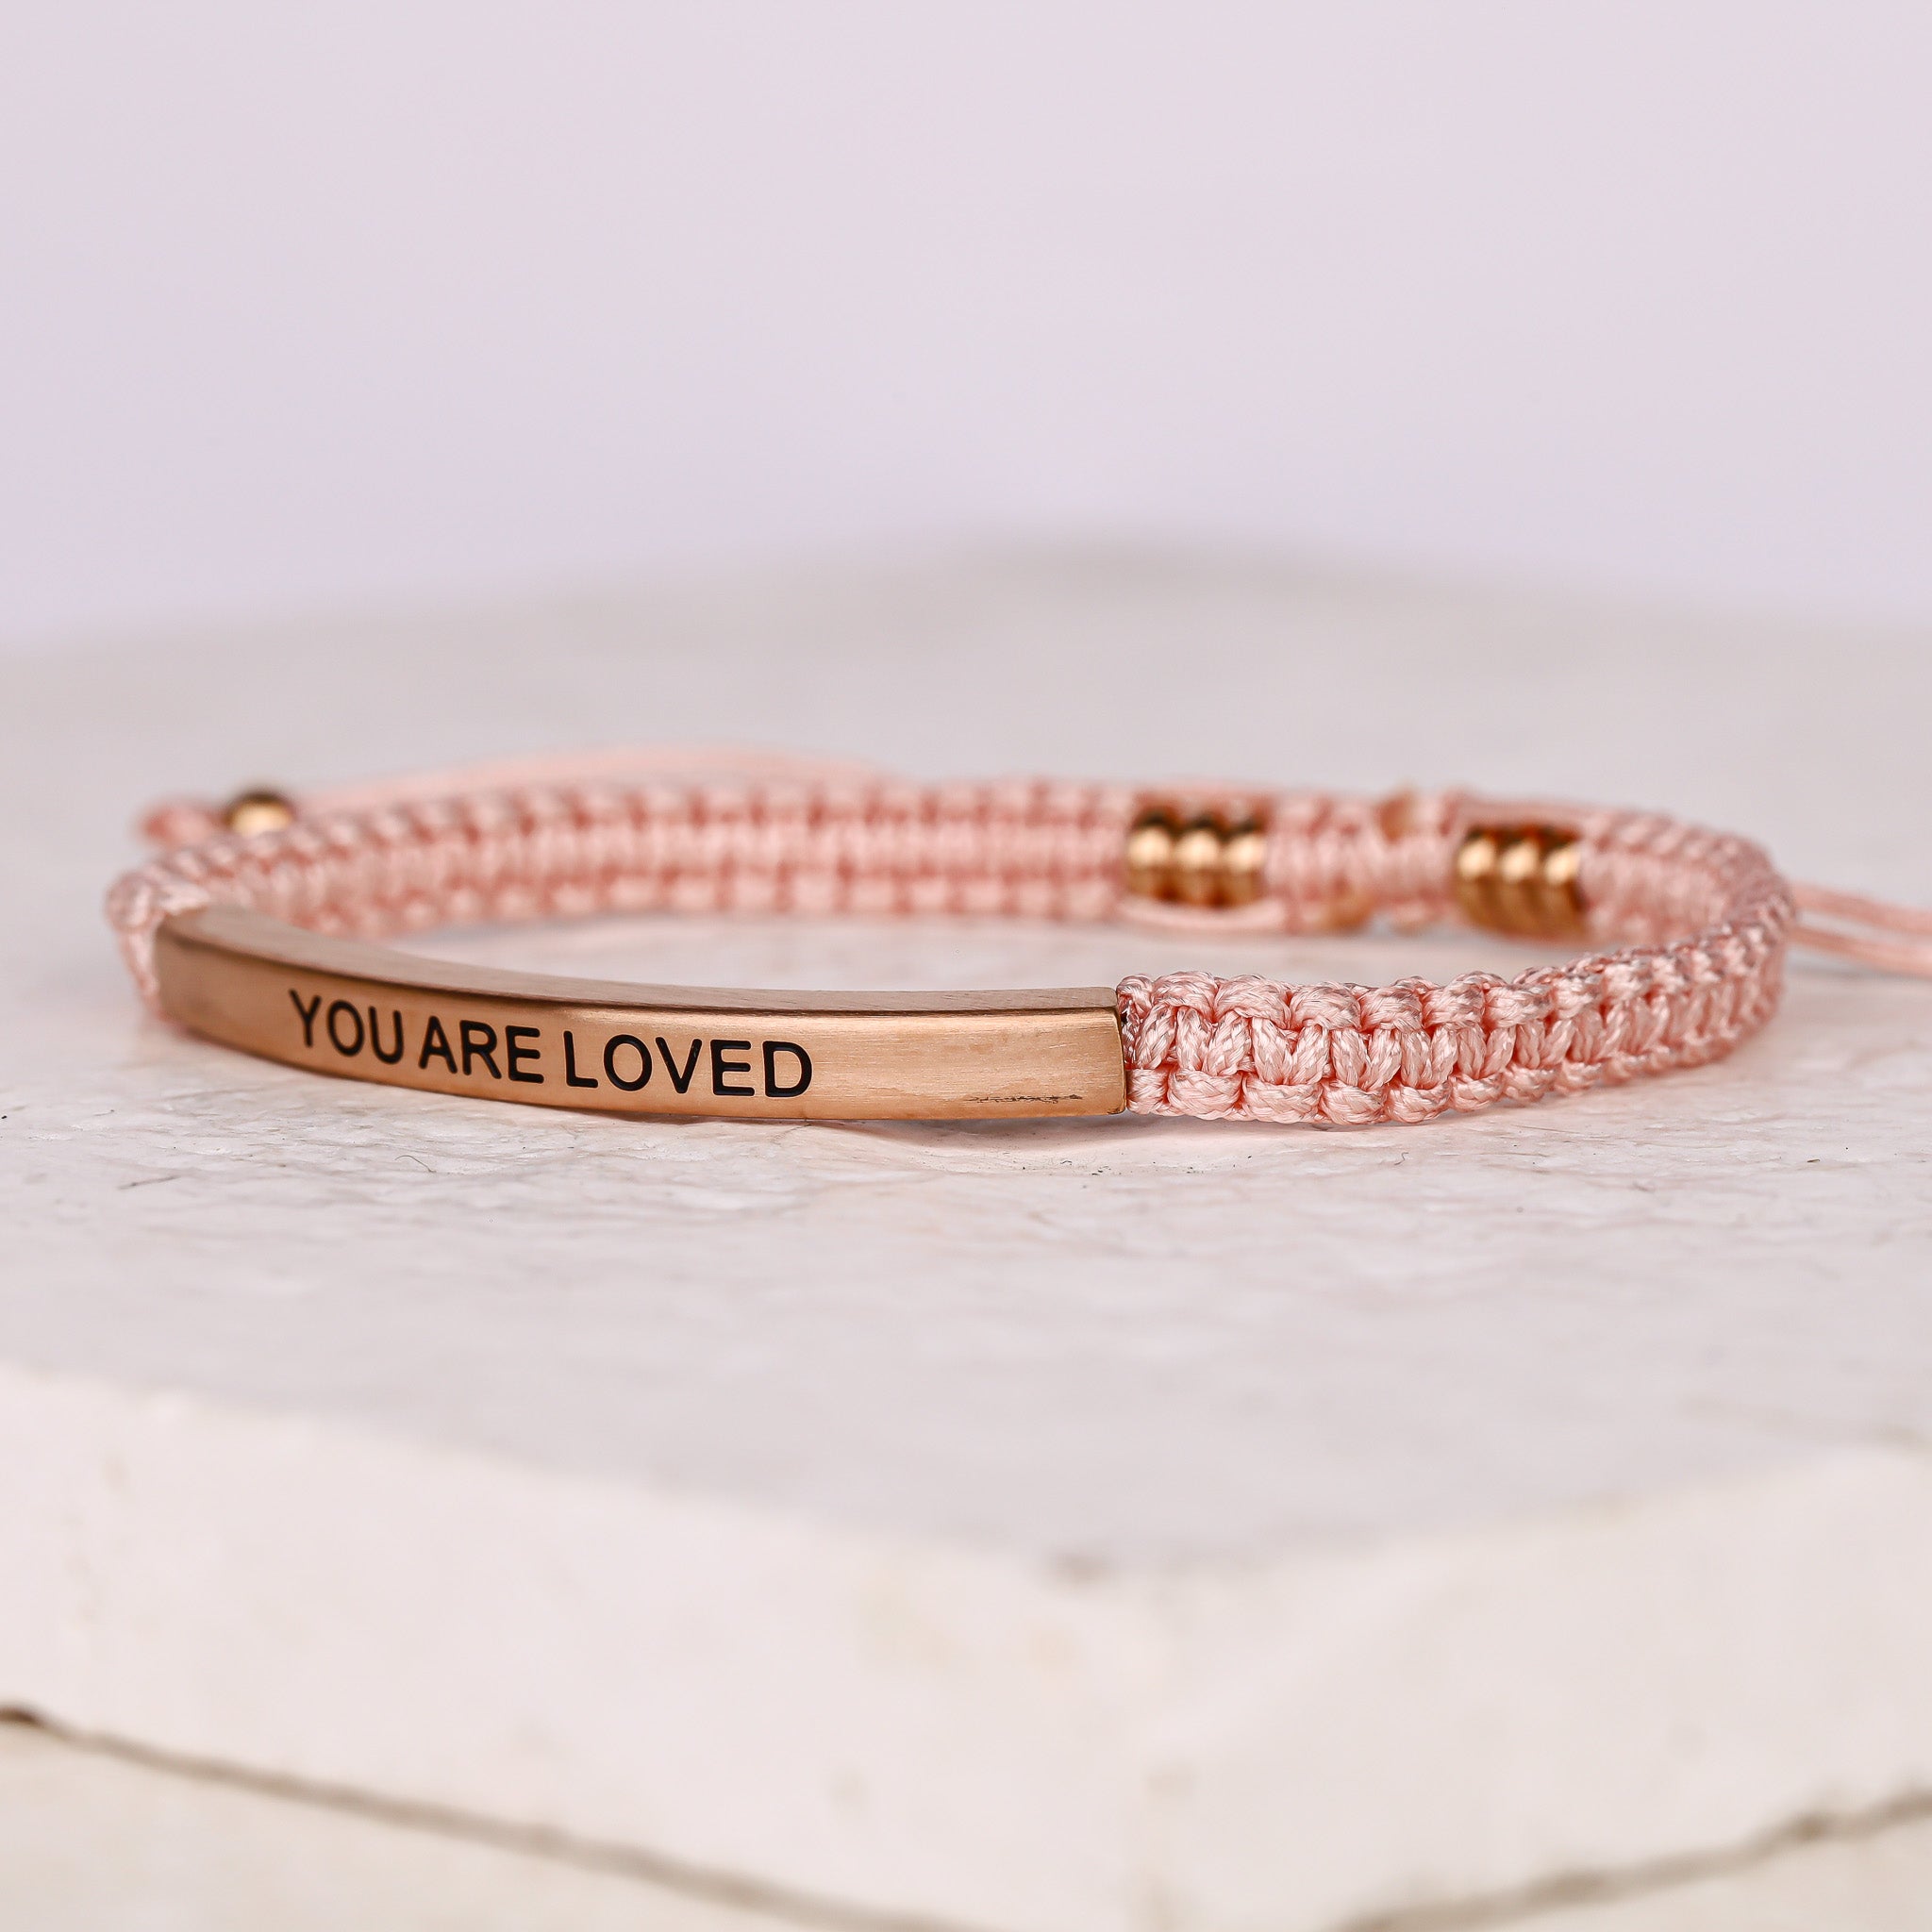 YOU ARE LOVED ROPE BRACELET - Inspiration Co.